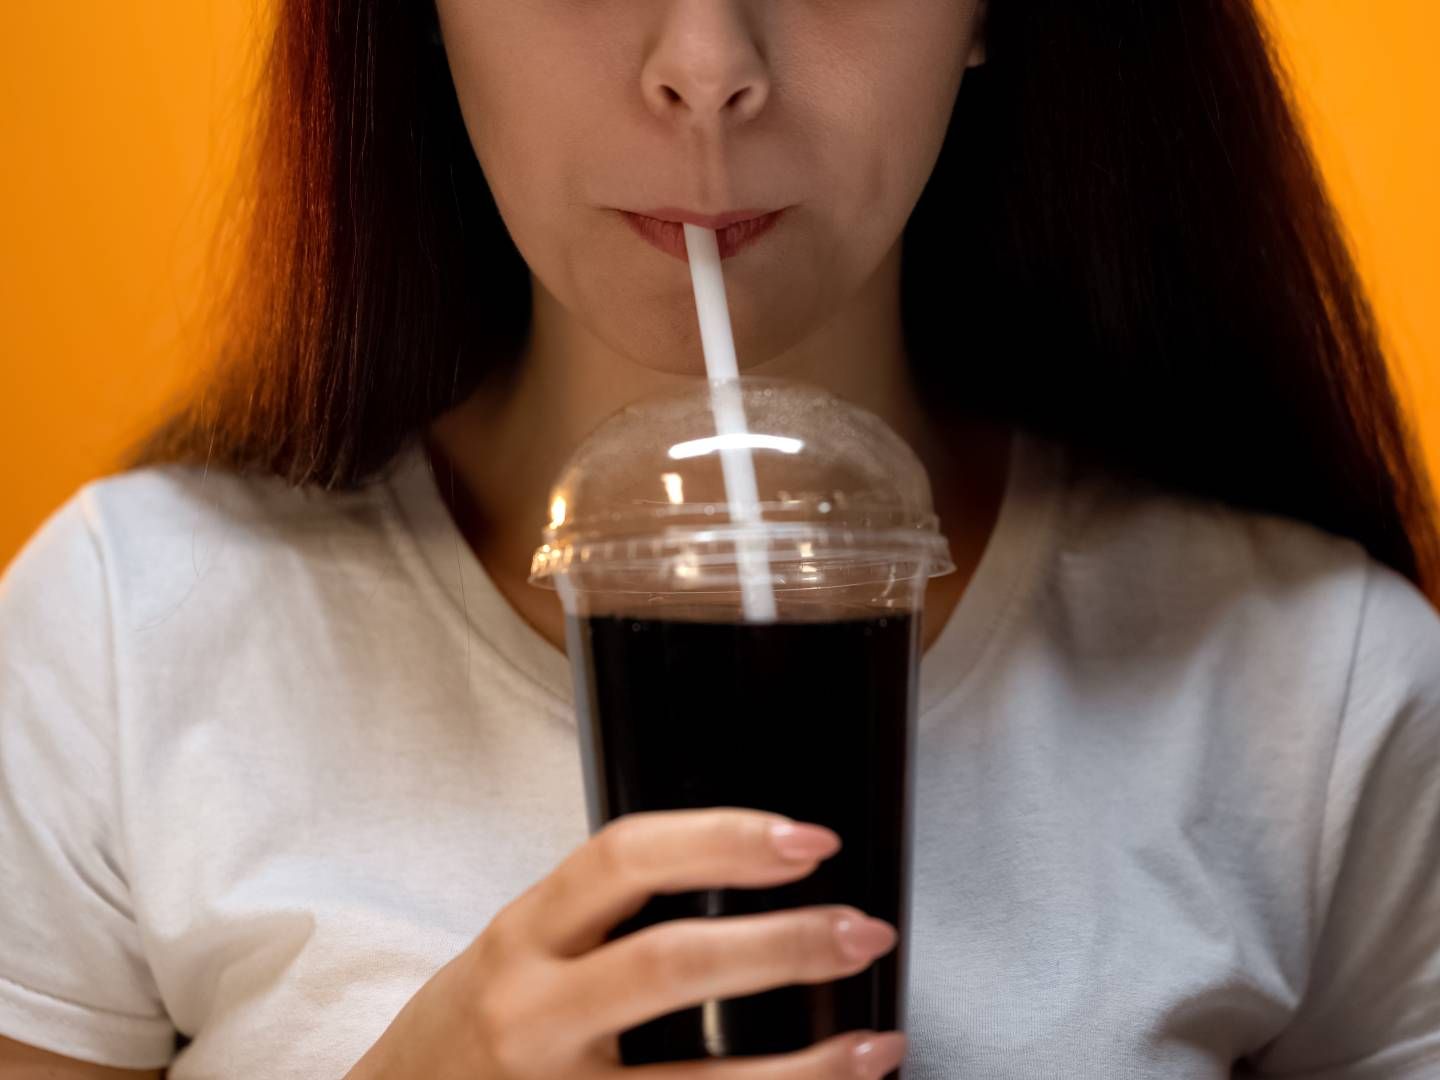 Research suggests that sugary soda may have a link to early colorectal cancer in women.